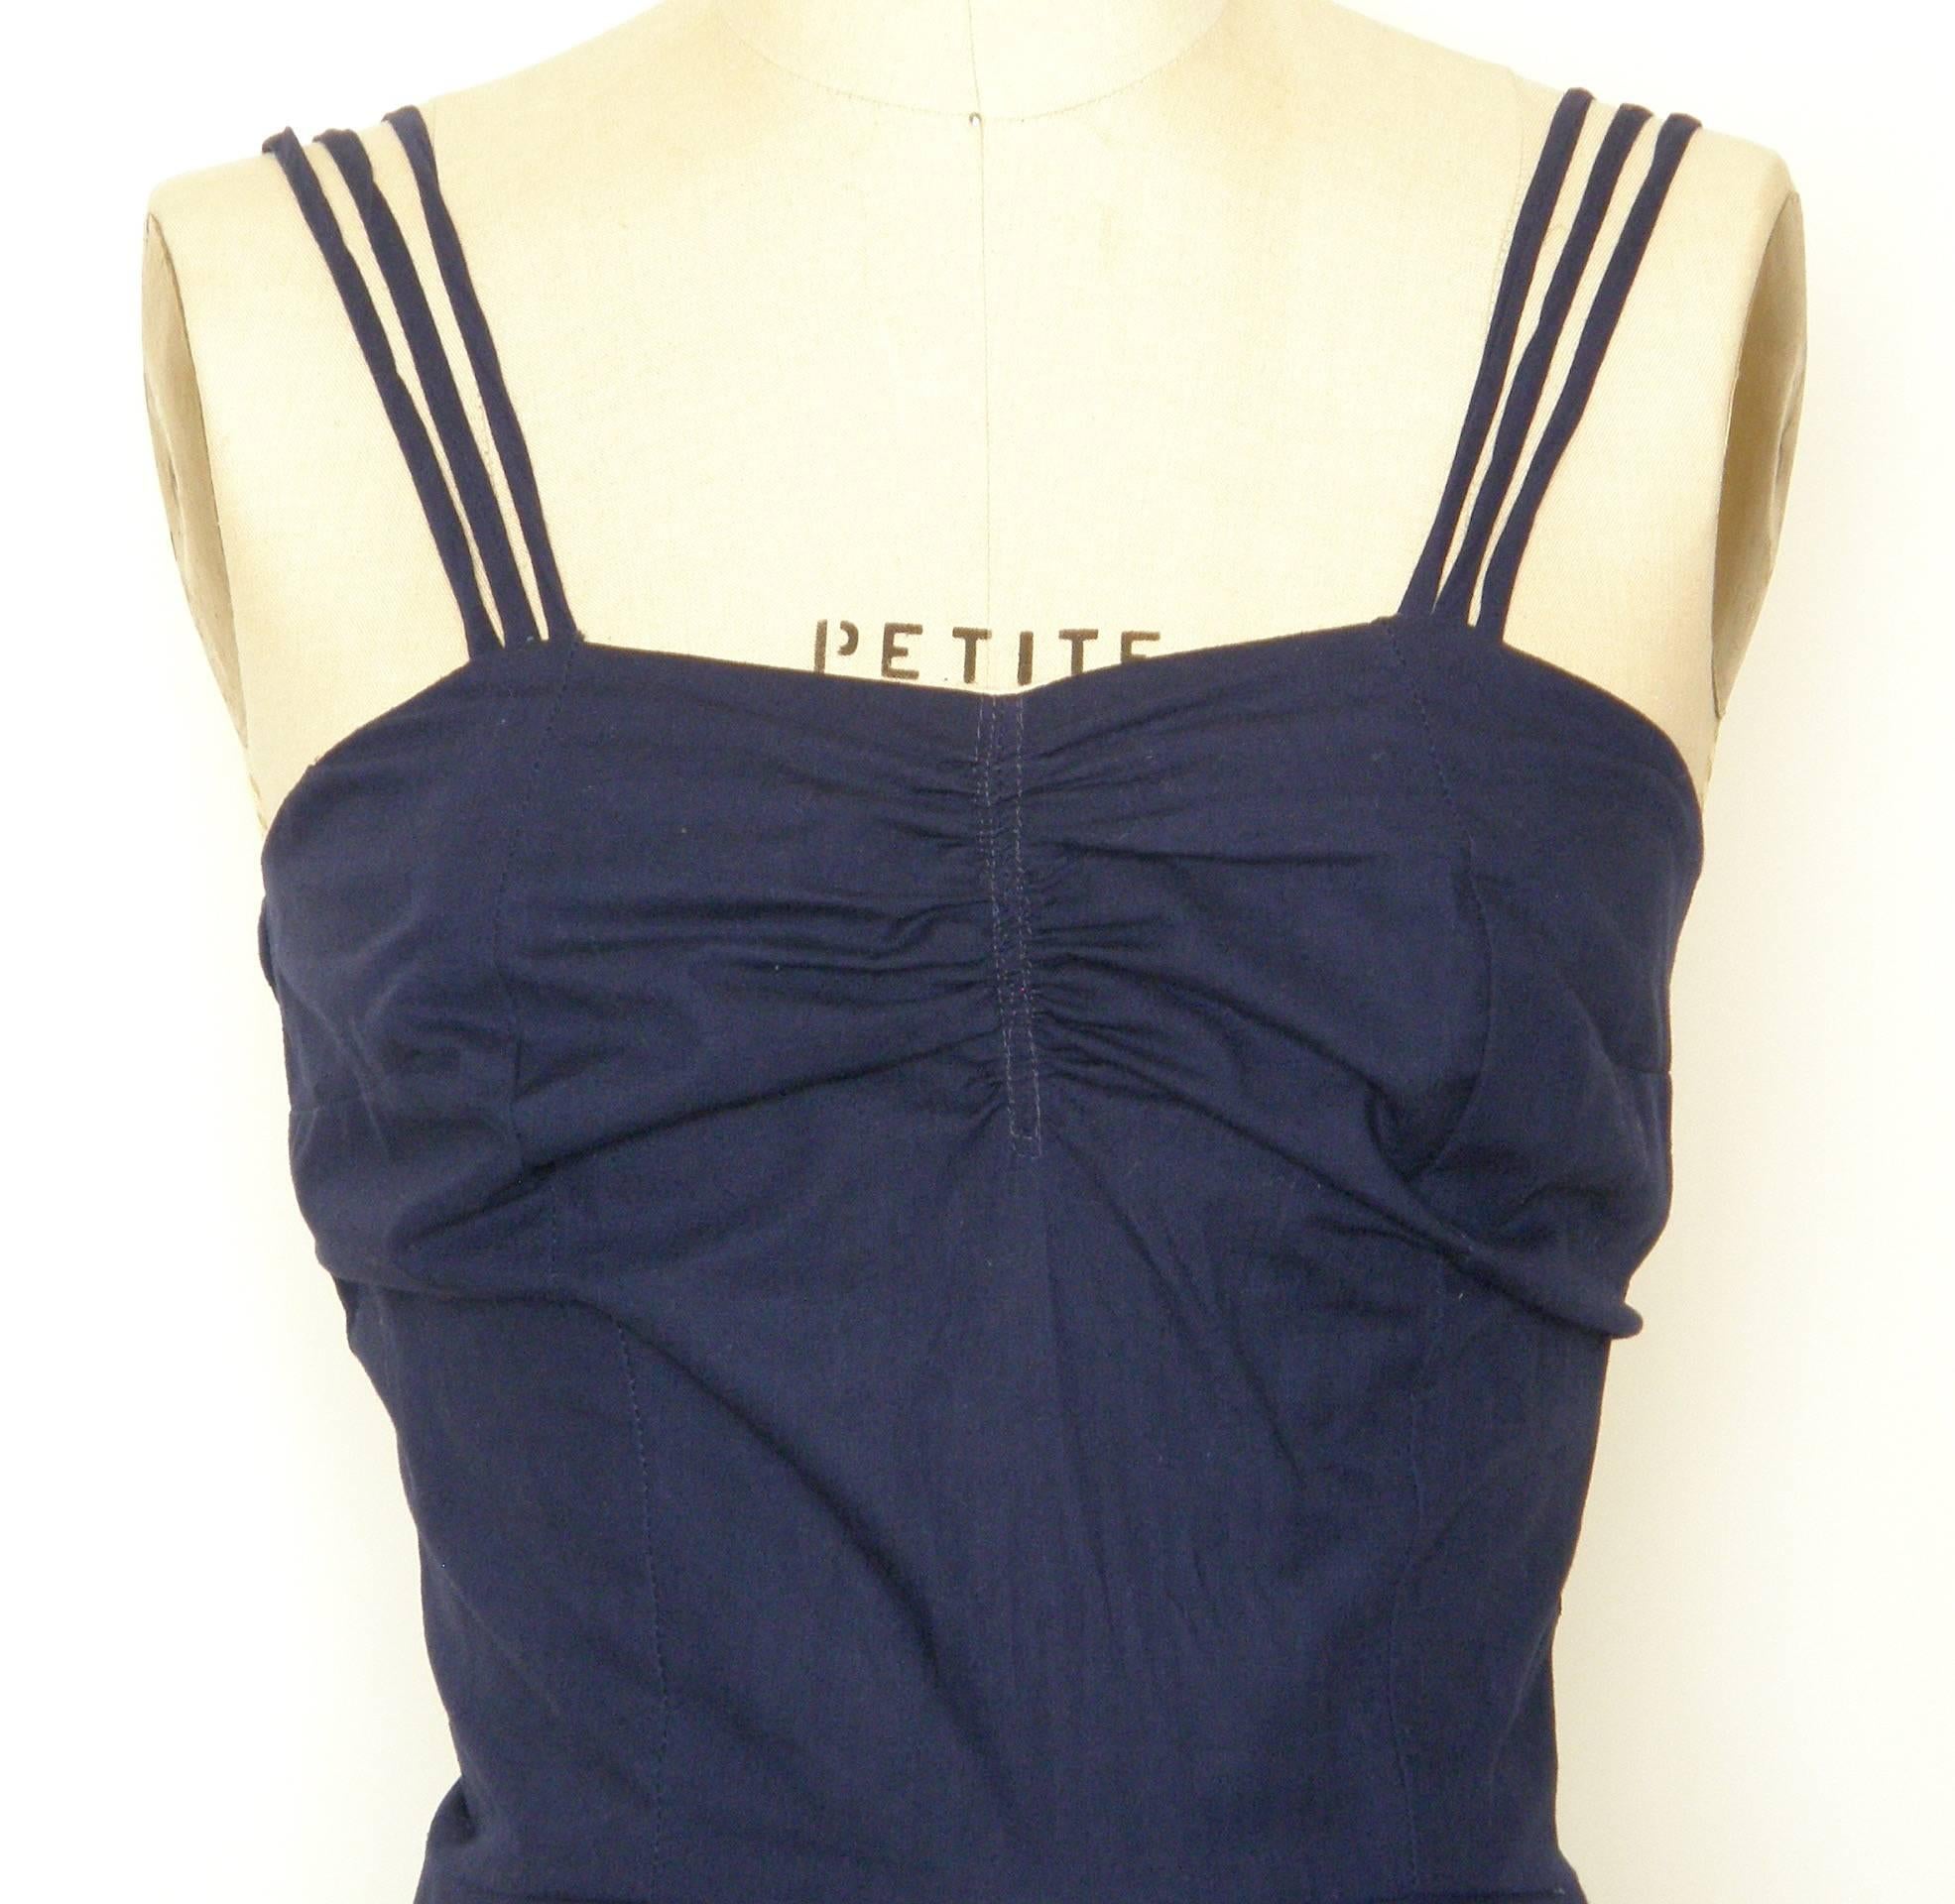 This navy blue cotton sundress was designed by Tachi Castillo and made in her workshop in Taxco, Mexico. She designed wonderful contemporary clothing inspired by classic Mexican clothing styles, and she utilized traditional techniques and shapes.